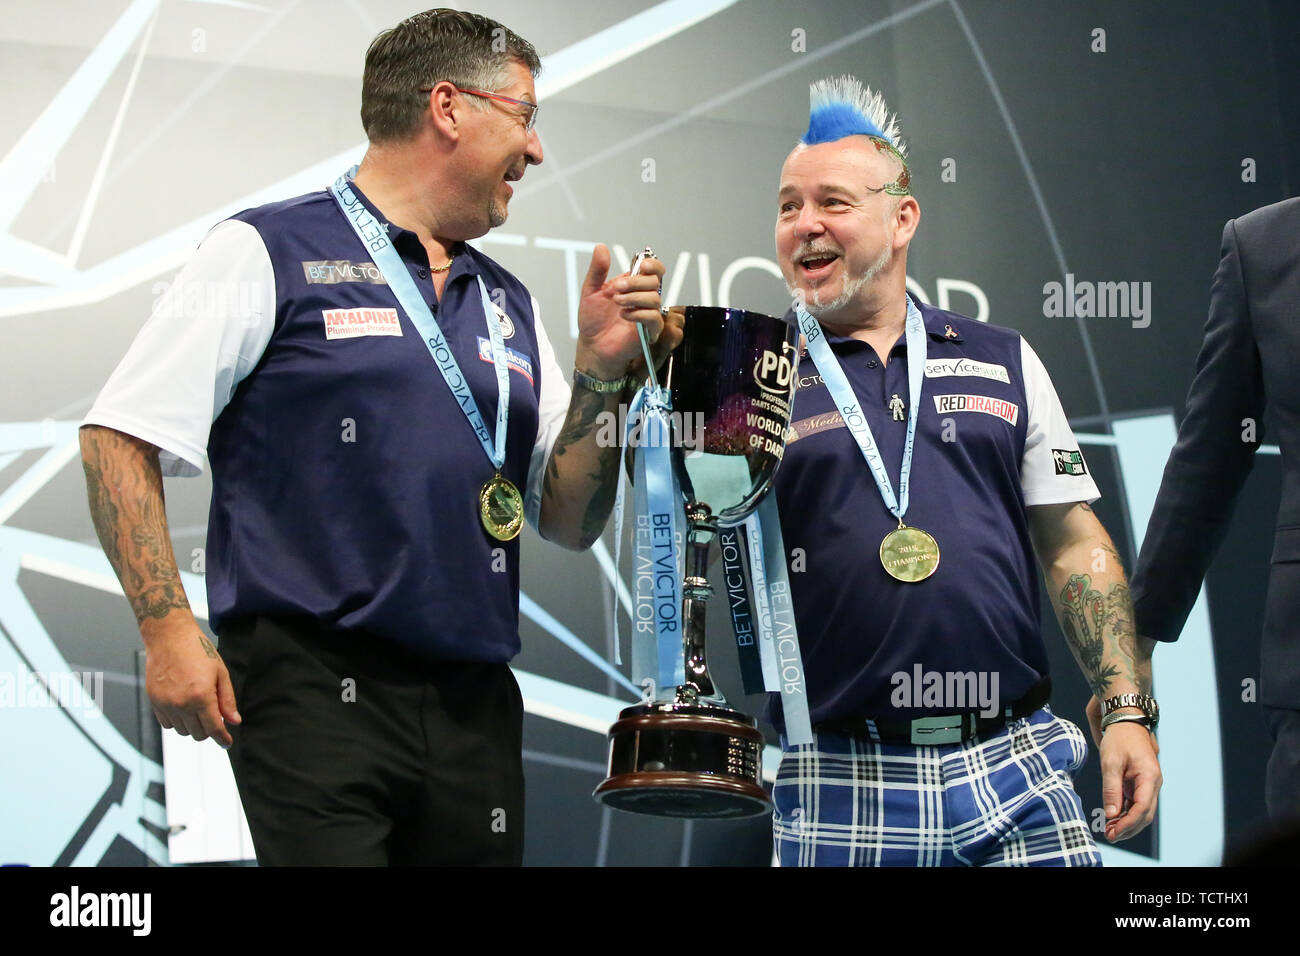 Hamburg, Germany. 09th June, 2019. Darts: Team World Championship, Final: Scotland - Ireland. The winning team Gary Anderson (l) and Peter Wright from Scotland cheer after the victory with their trophy. Credit: Bodo Marks/dpa/Alamy Live News Stock Photo